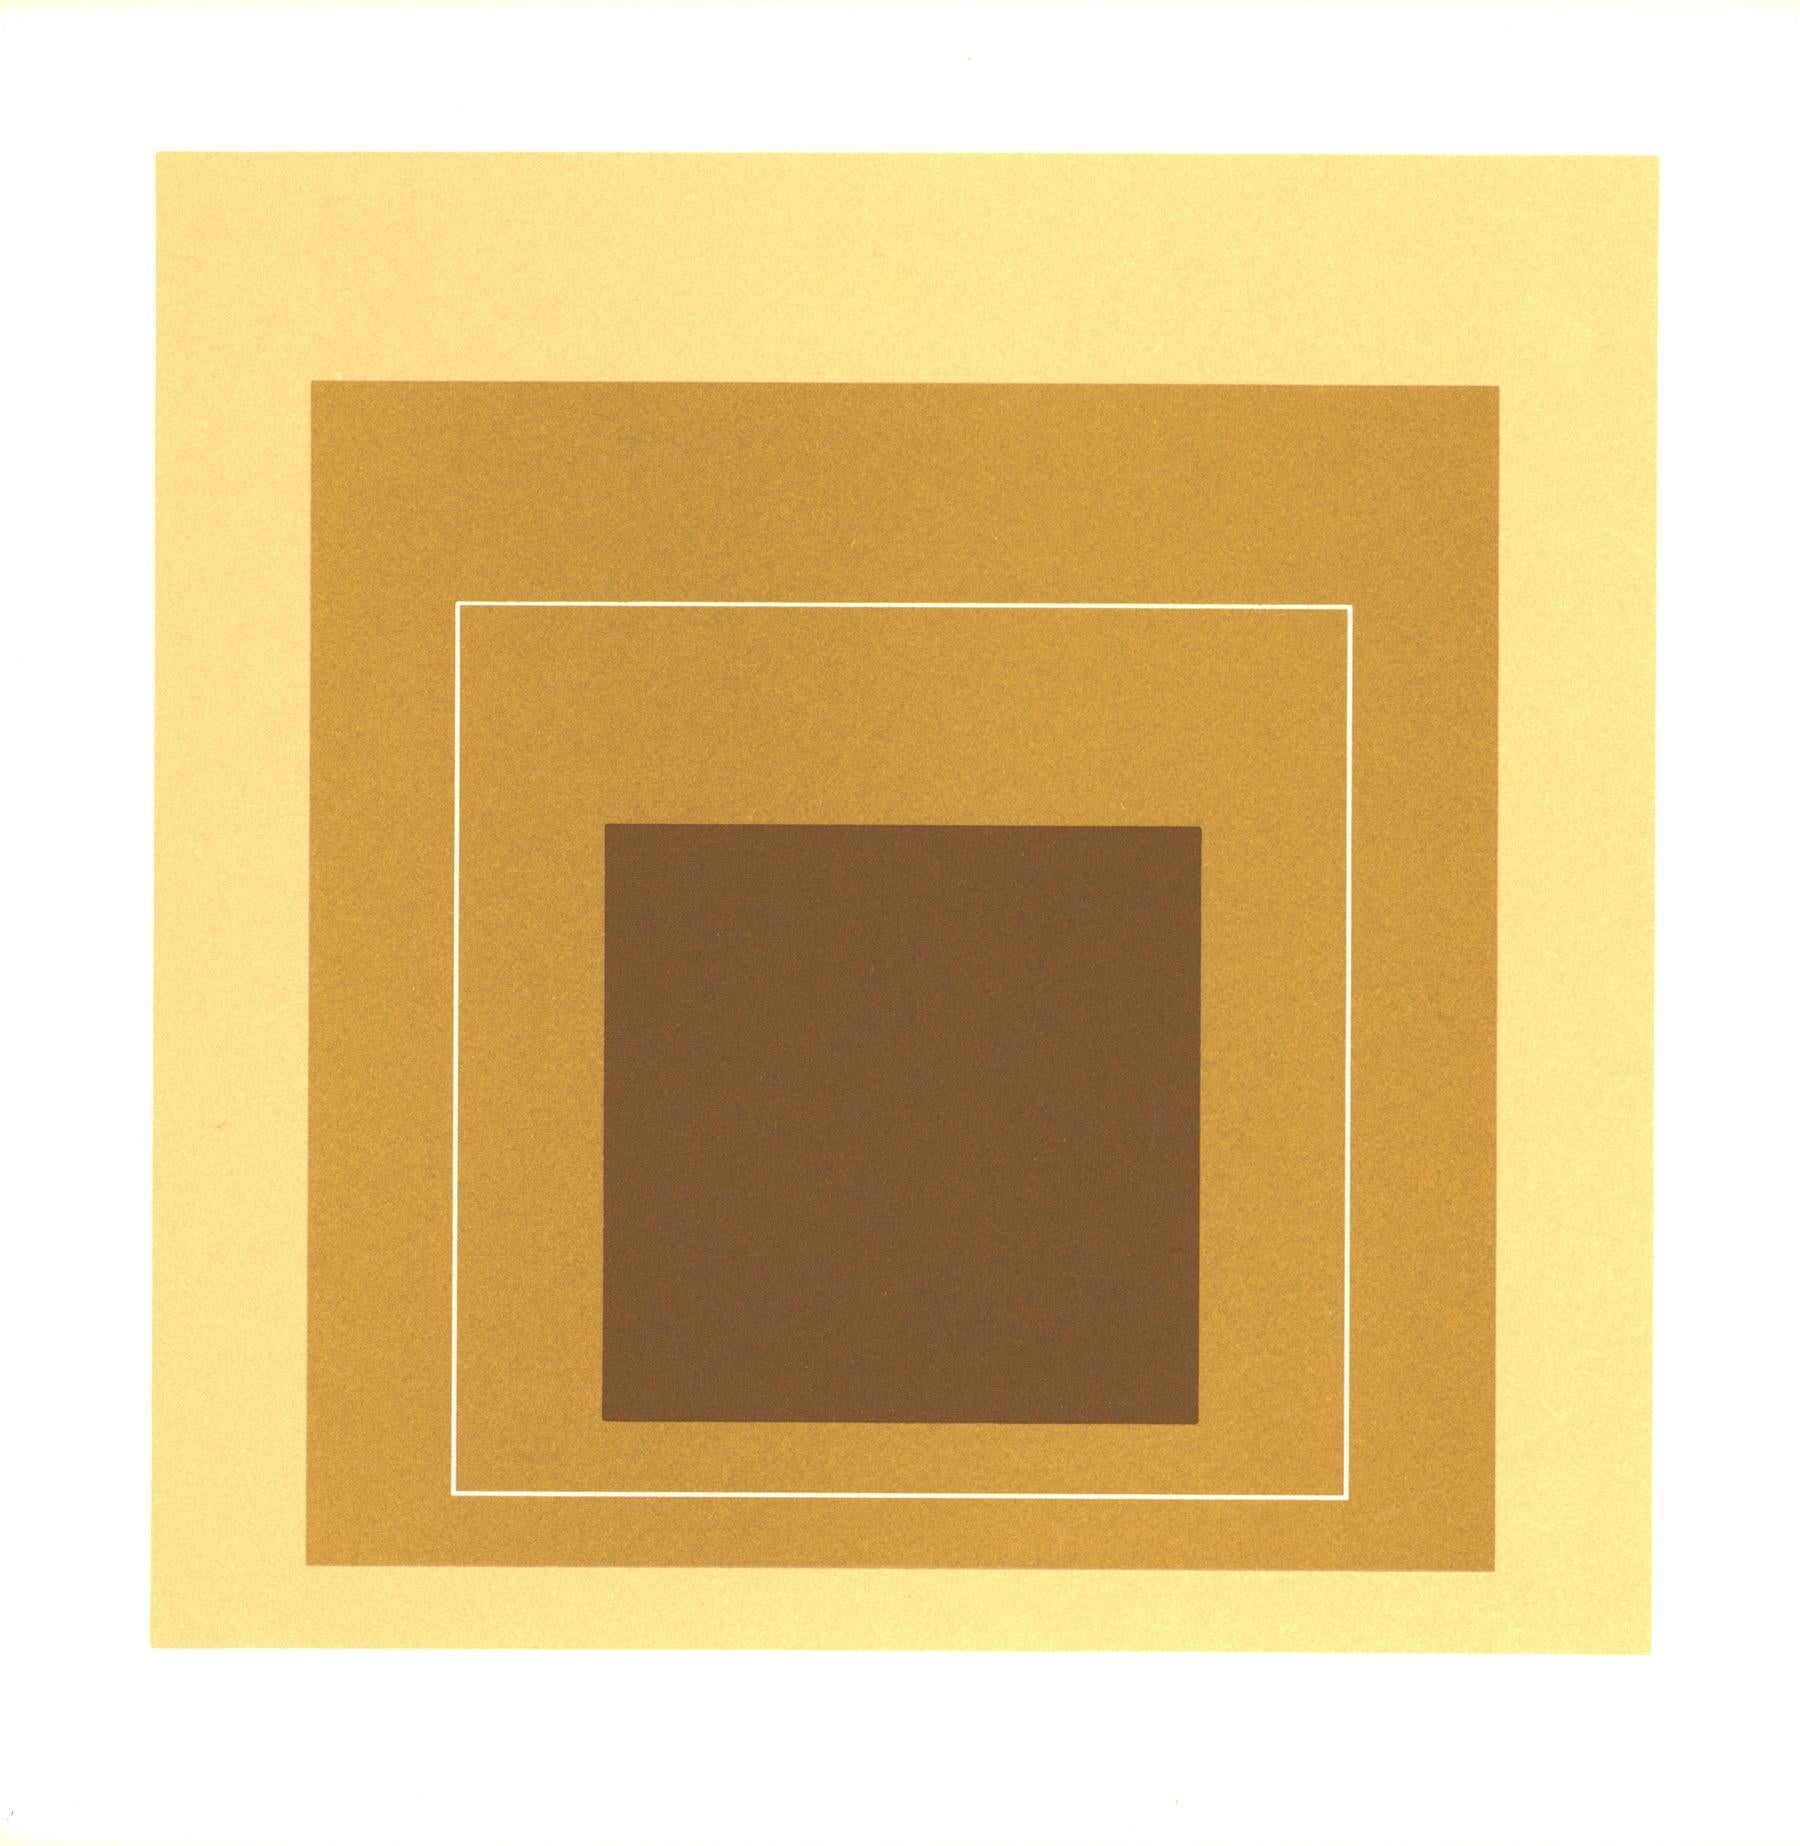 Josef Albers White Line Squares (set of 6) - Contemporary Print by (after) Josef Albers